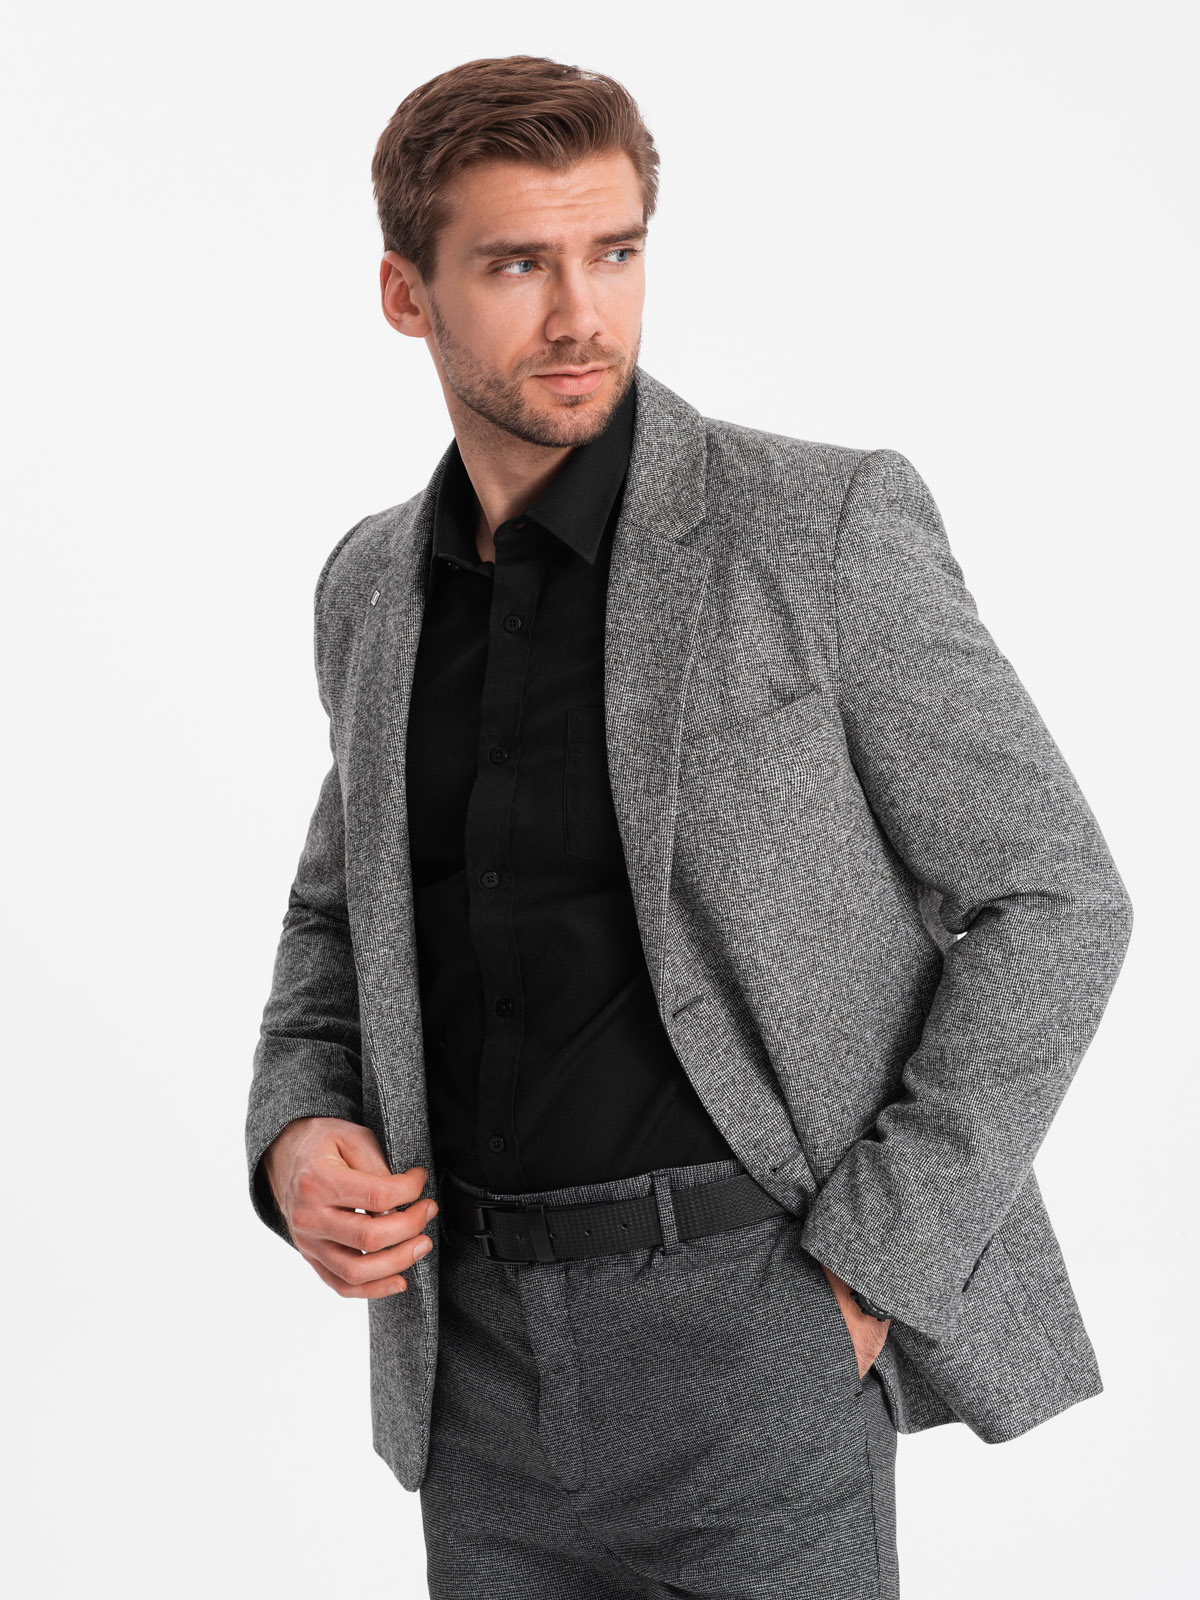 Ombre Men's casual jacket with decorative pin on lapel - grey melange